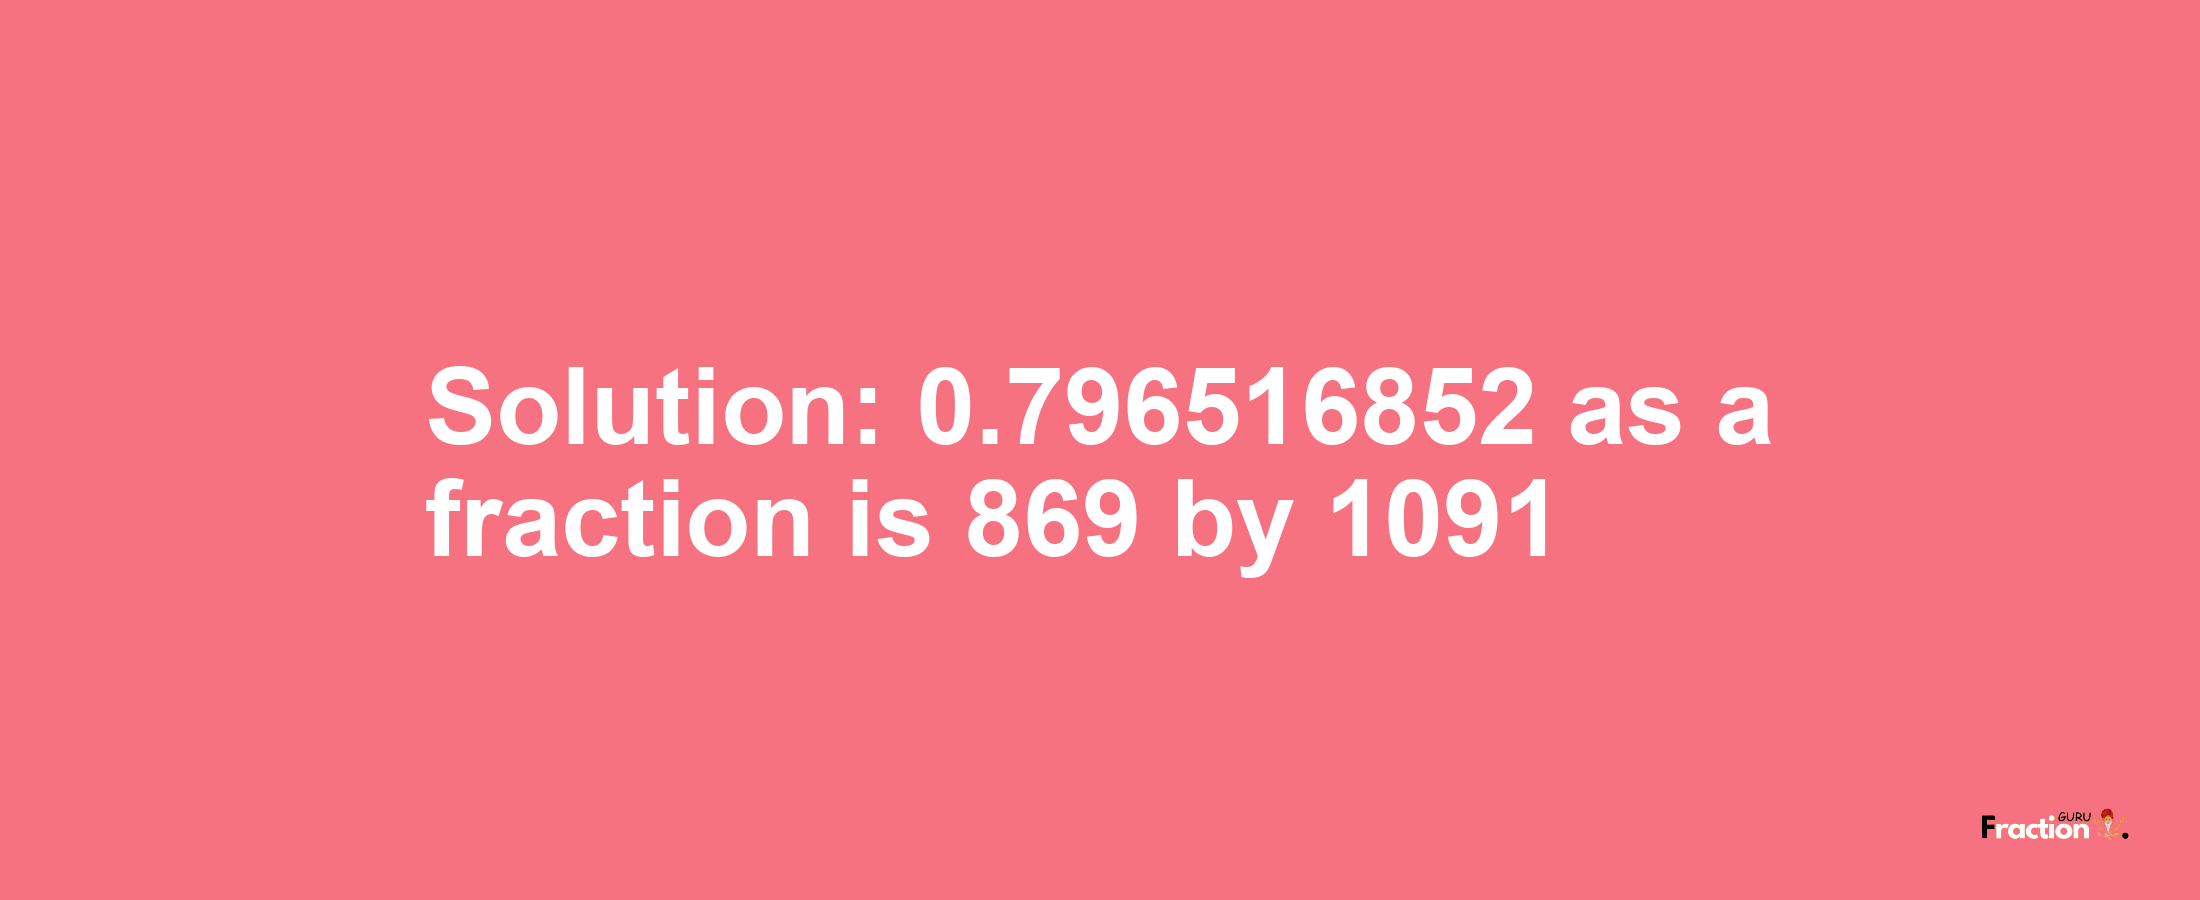 Solution:0.796516852 as a fraction is 869/1091